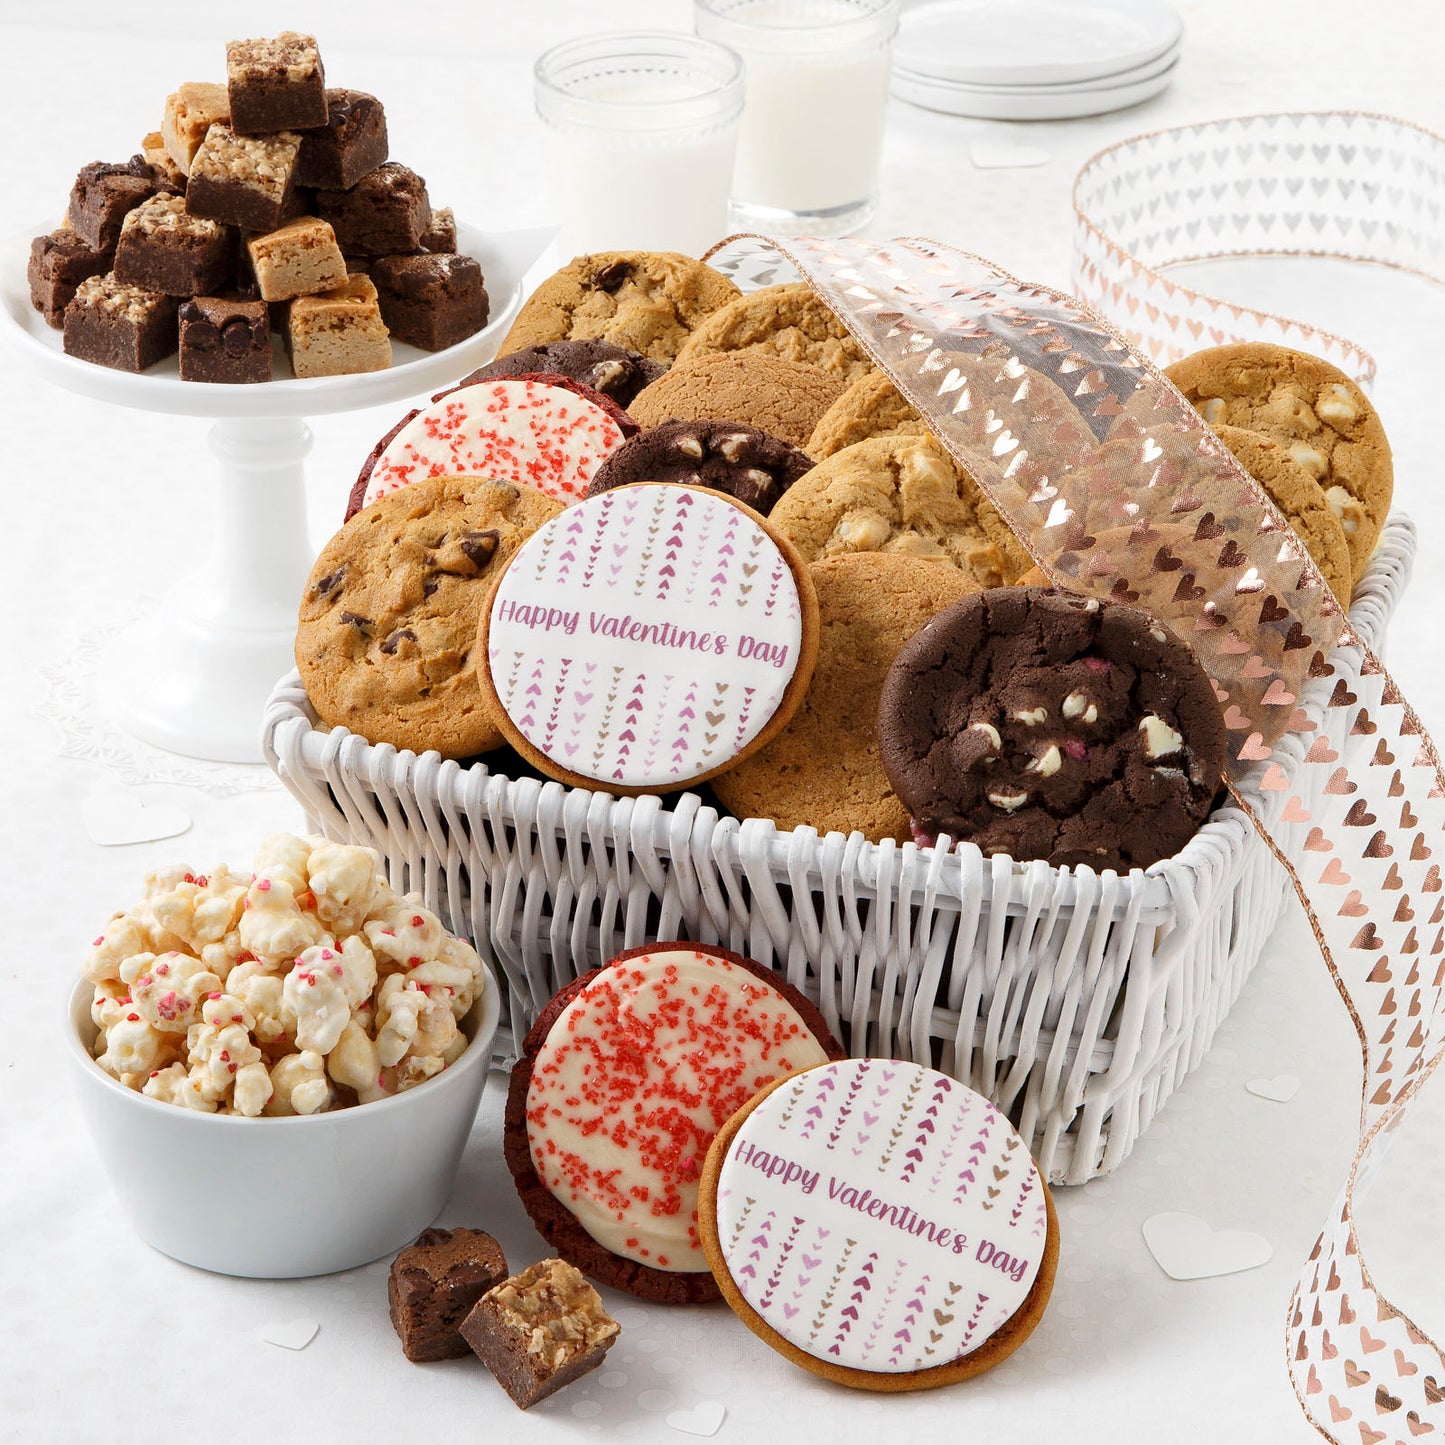 A white basket tied with a heart ribbon and filled with an assortment of original cookies, brownie bites, two frosted red velvet cookies, two logo cookies, and popcorn